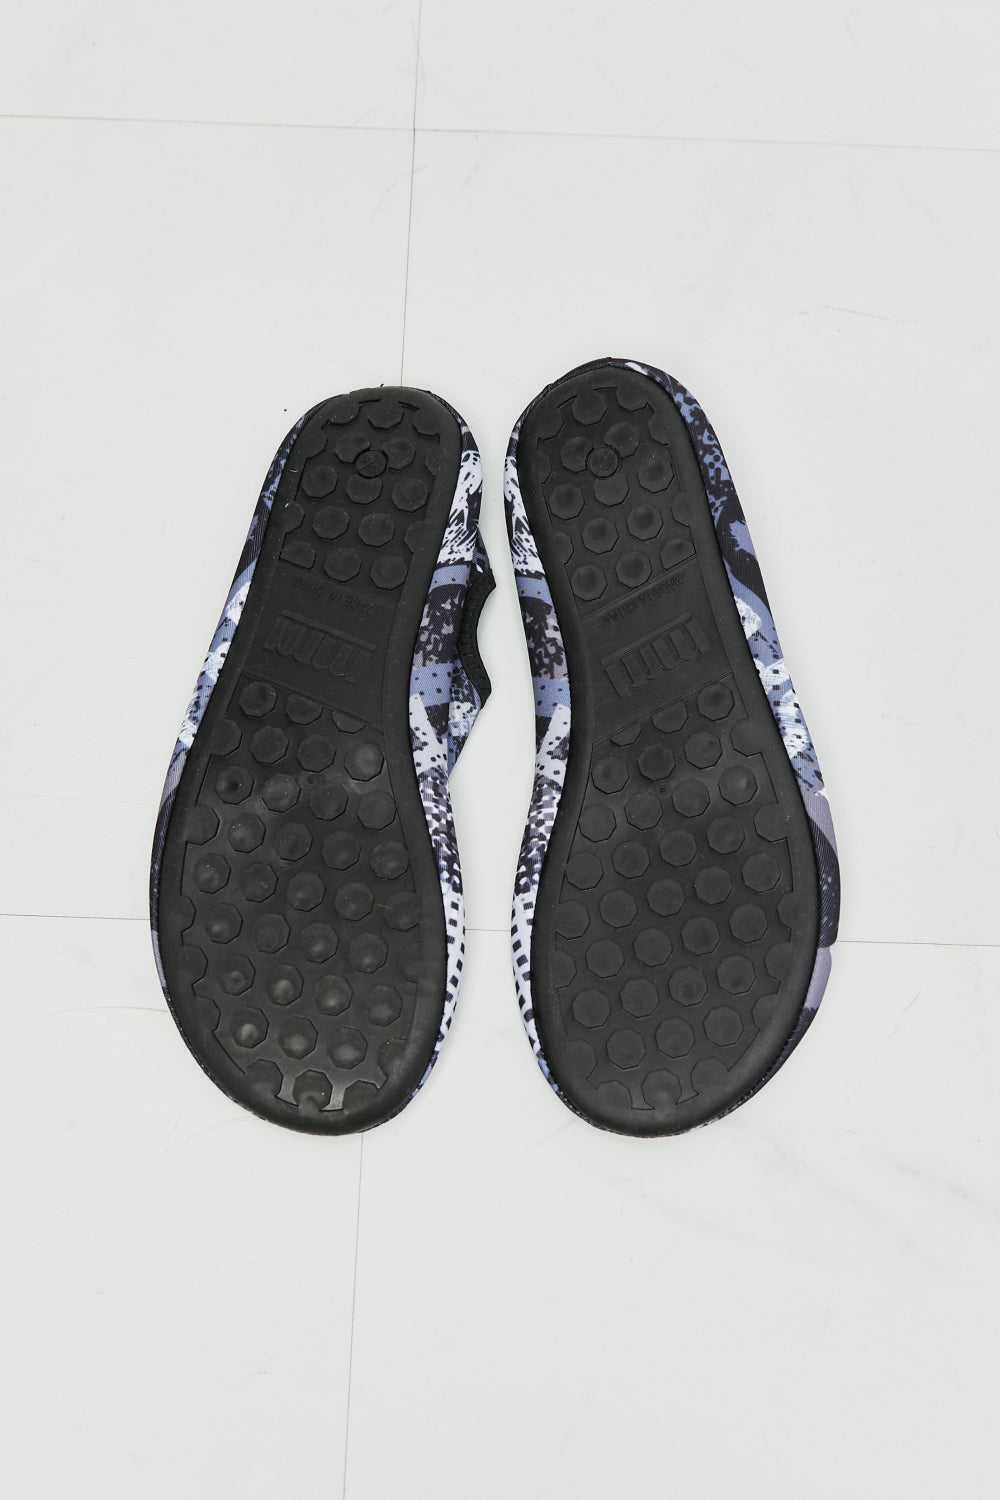 MMshoes On The Shore Water Shoes in Black Pattern - AllIn Computer